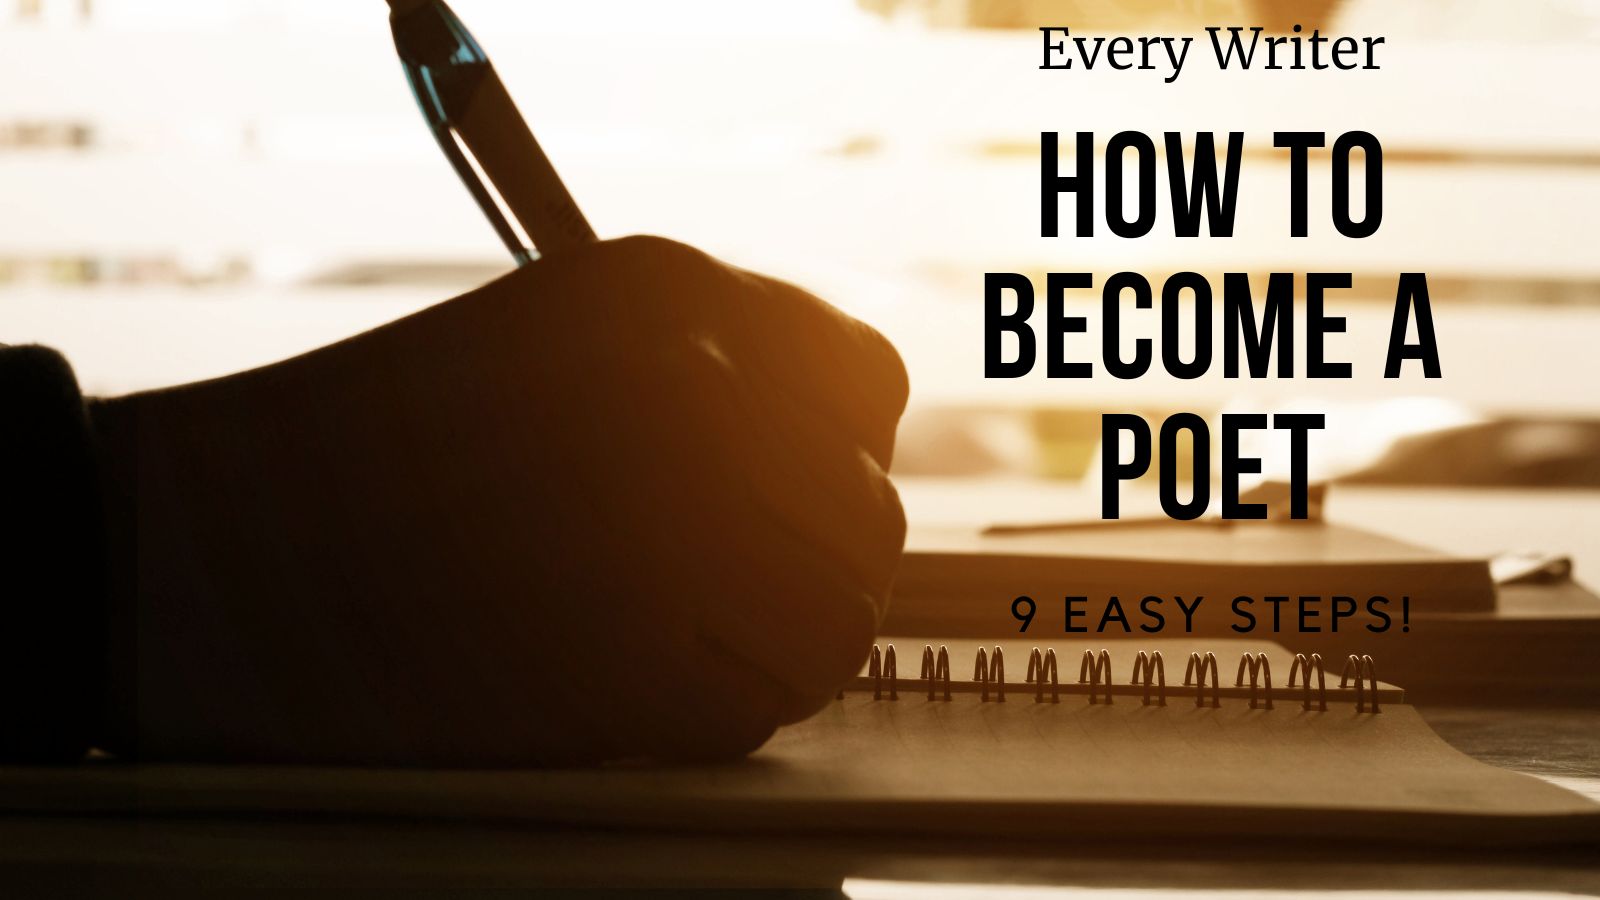 How to become a poet in 9 steps